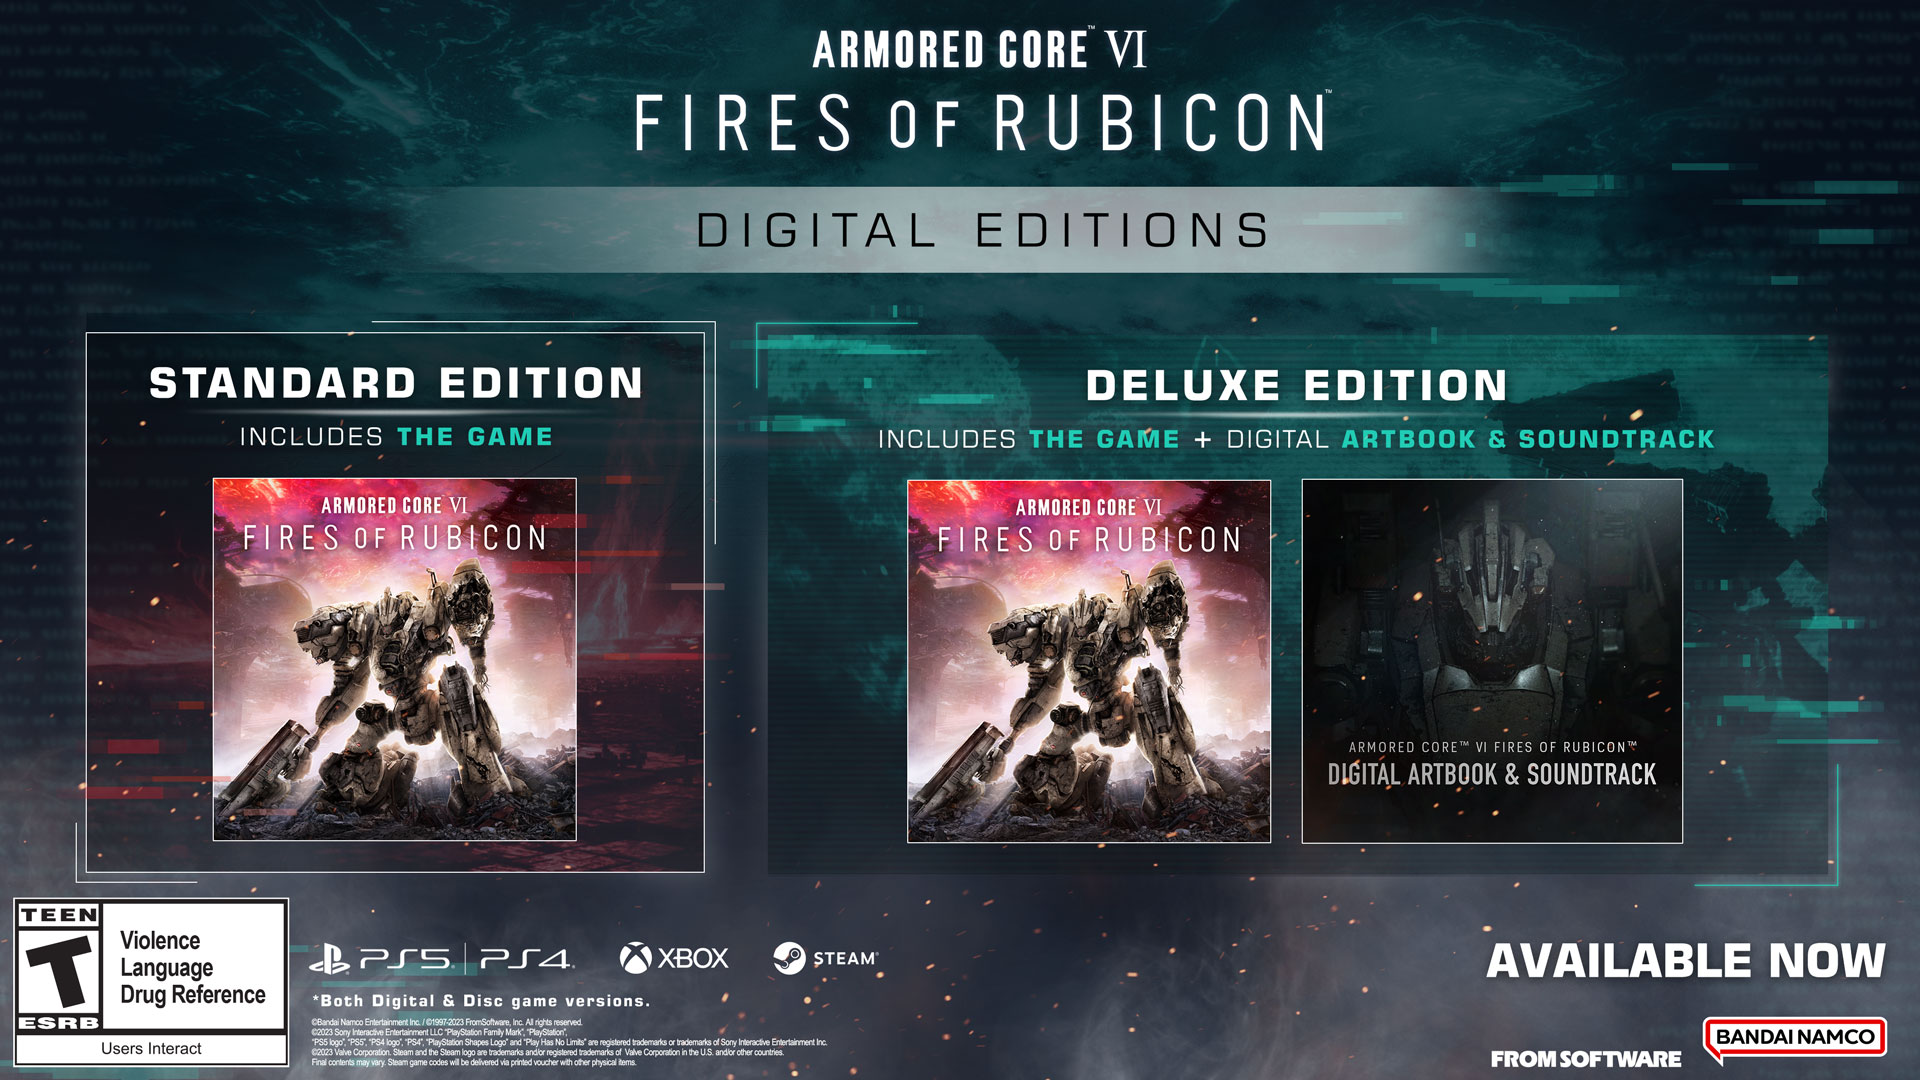 ARMORED CORE VI FIRES OF RUBICON Digital Deluxe Edition Product Image